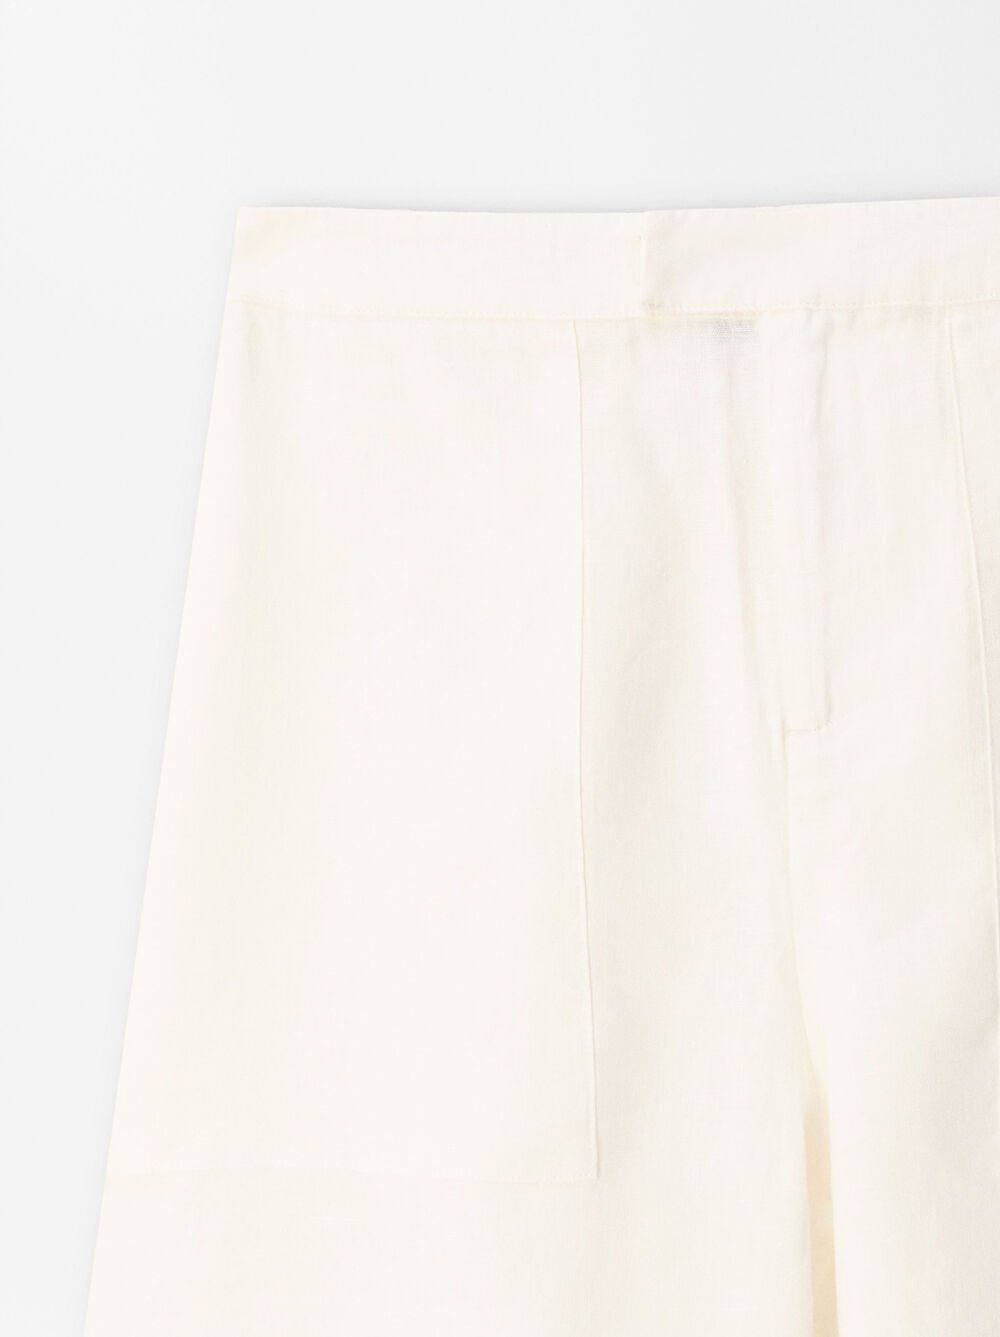 100% Linen Trousers image number 6.0